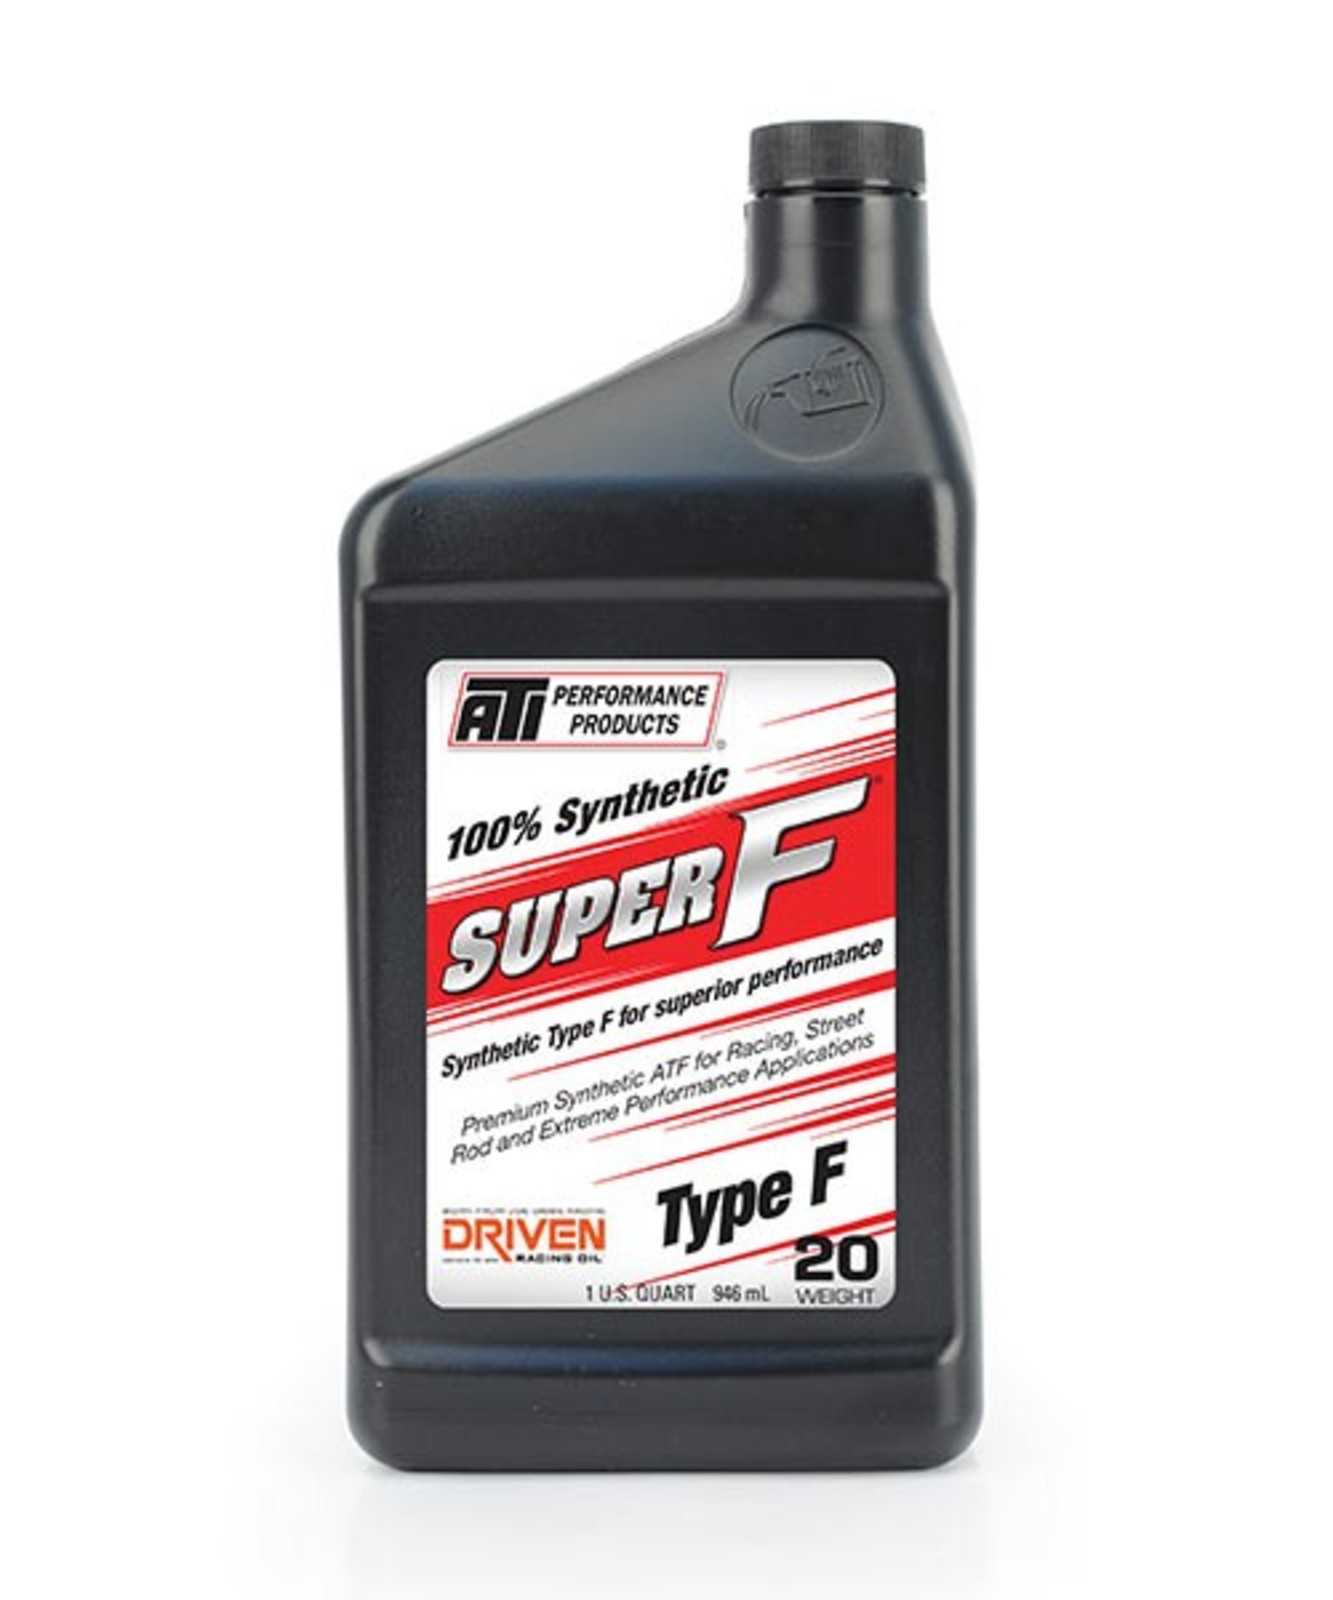 Driven Super F Synthetic ATF